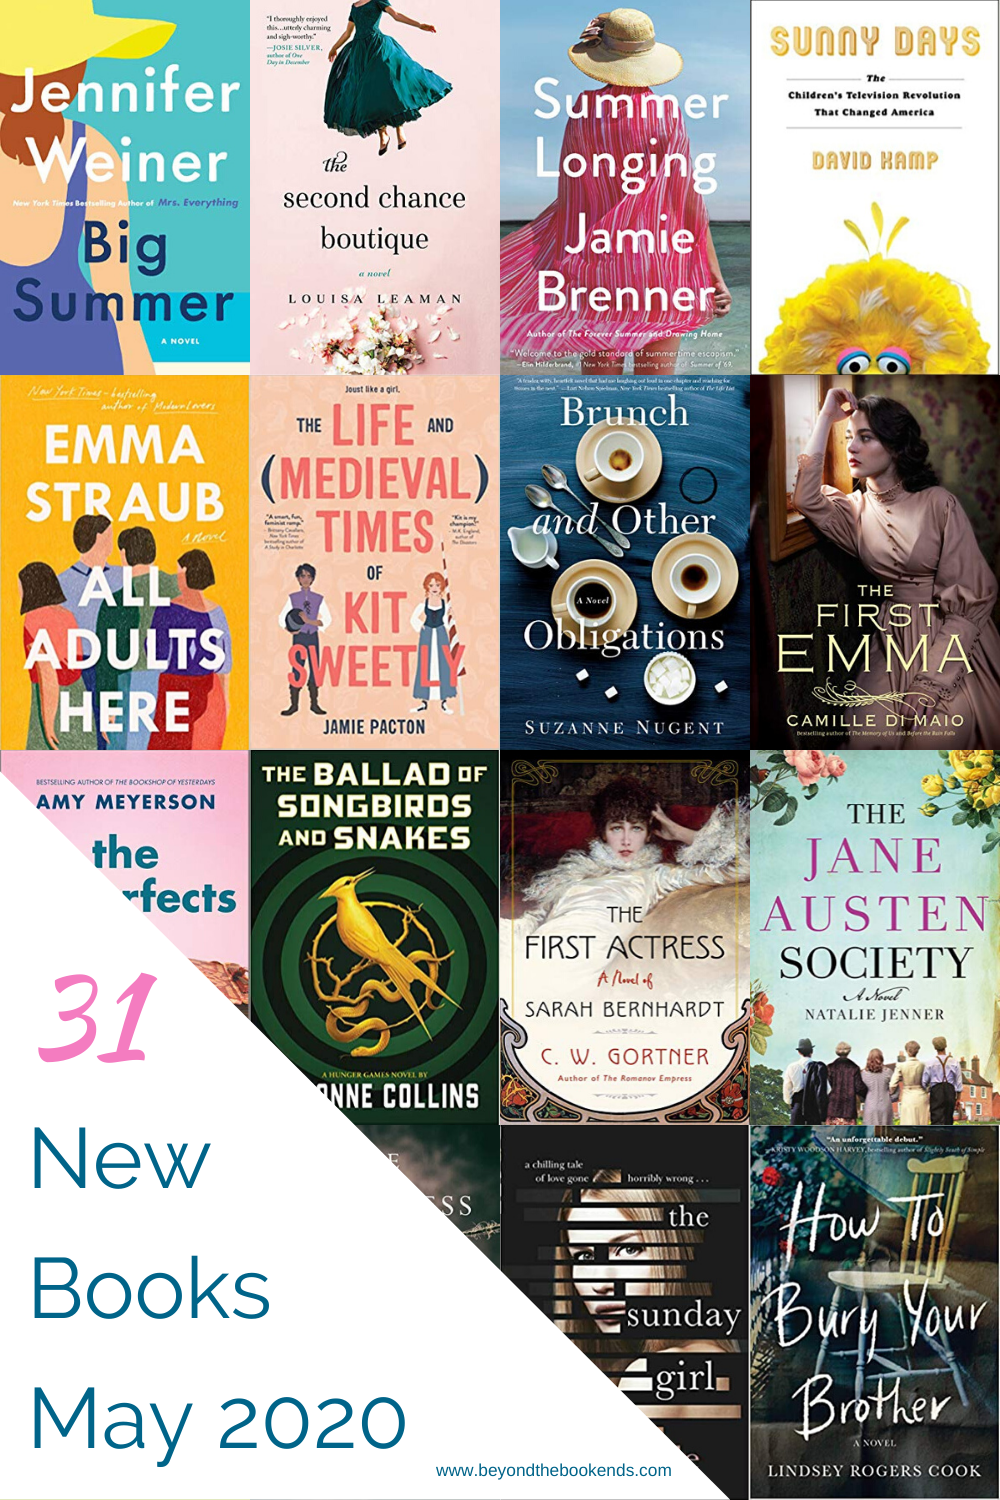 From Brunch and Other Obligations to the Jane Austen Society and the Ballad of Songbirds and Snakes, We have some amazing new books for May 2020. So make Room for Emma Straub and Jennifer Weiner!